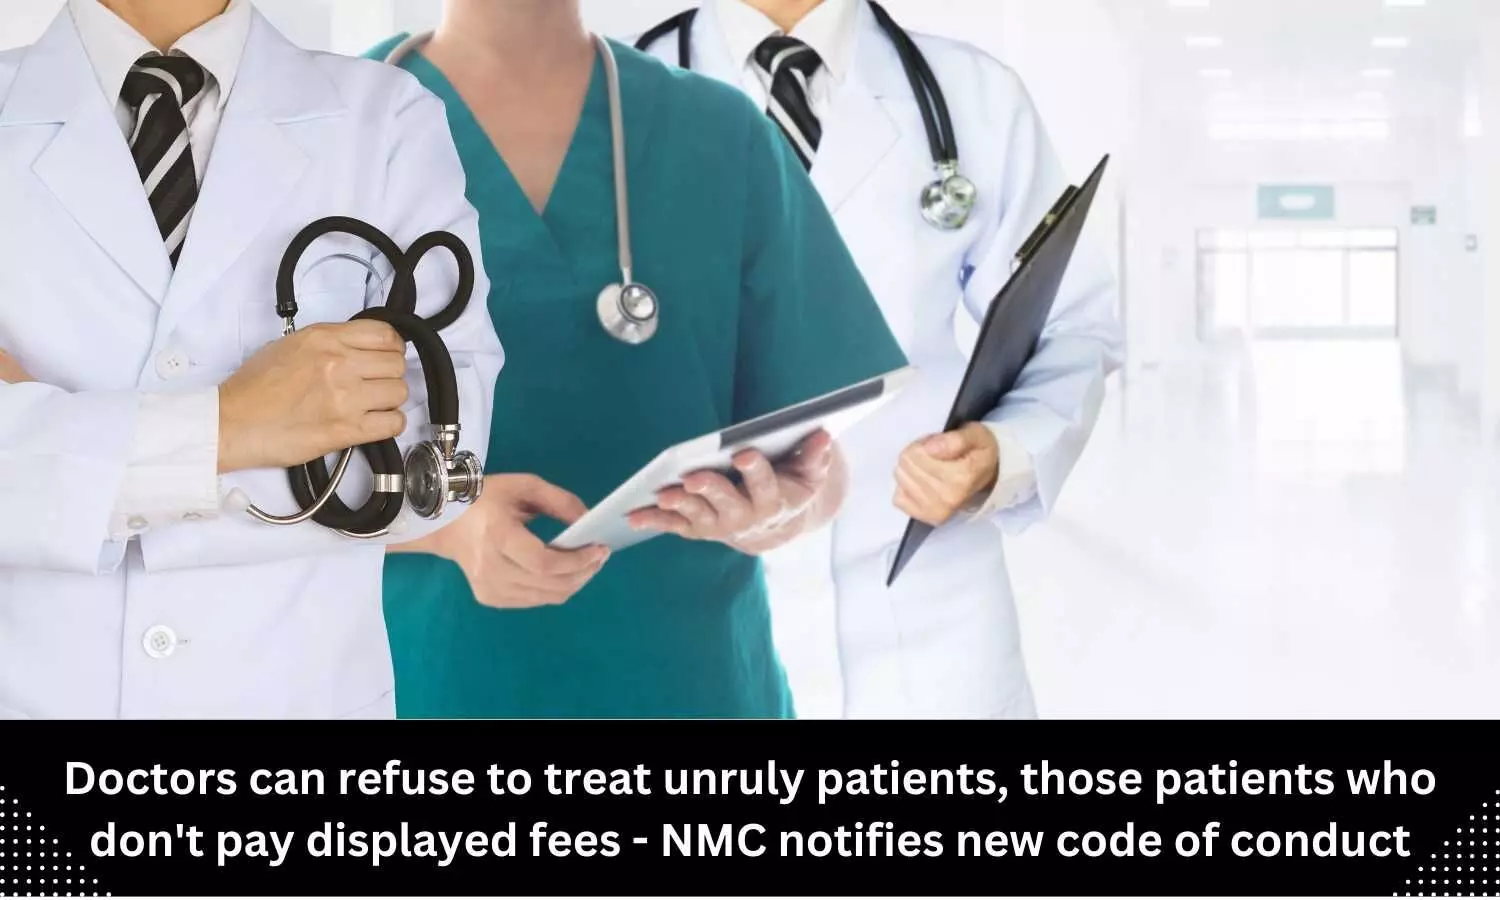 NMC notifies new code of conduct: Doctors can refuse to treat unruly patients, those patients who dont pay displayed fees